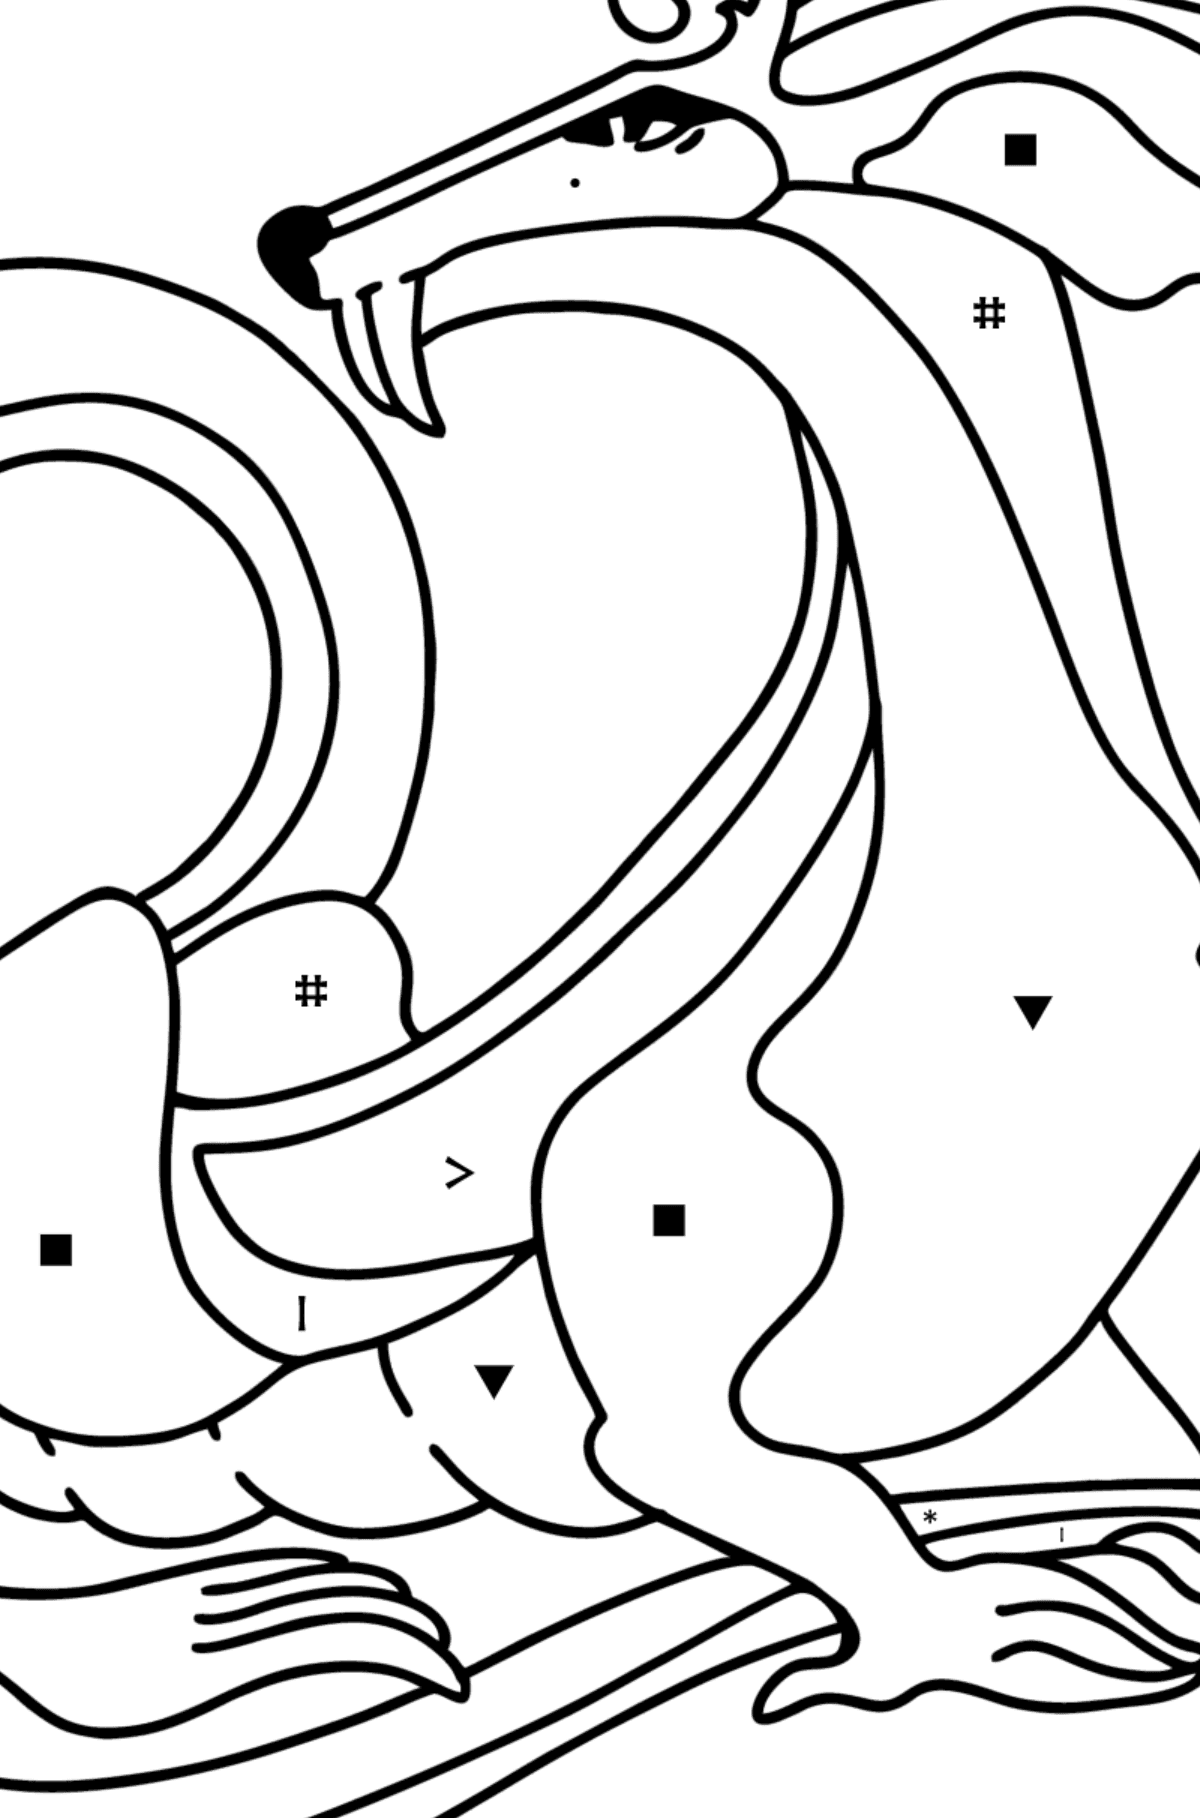 Calm Dragon coloring page - Coloring by Symbols for Kids